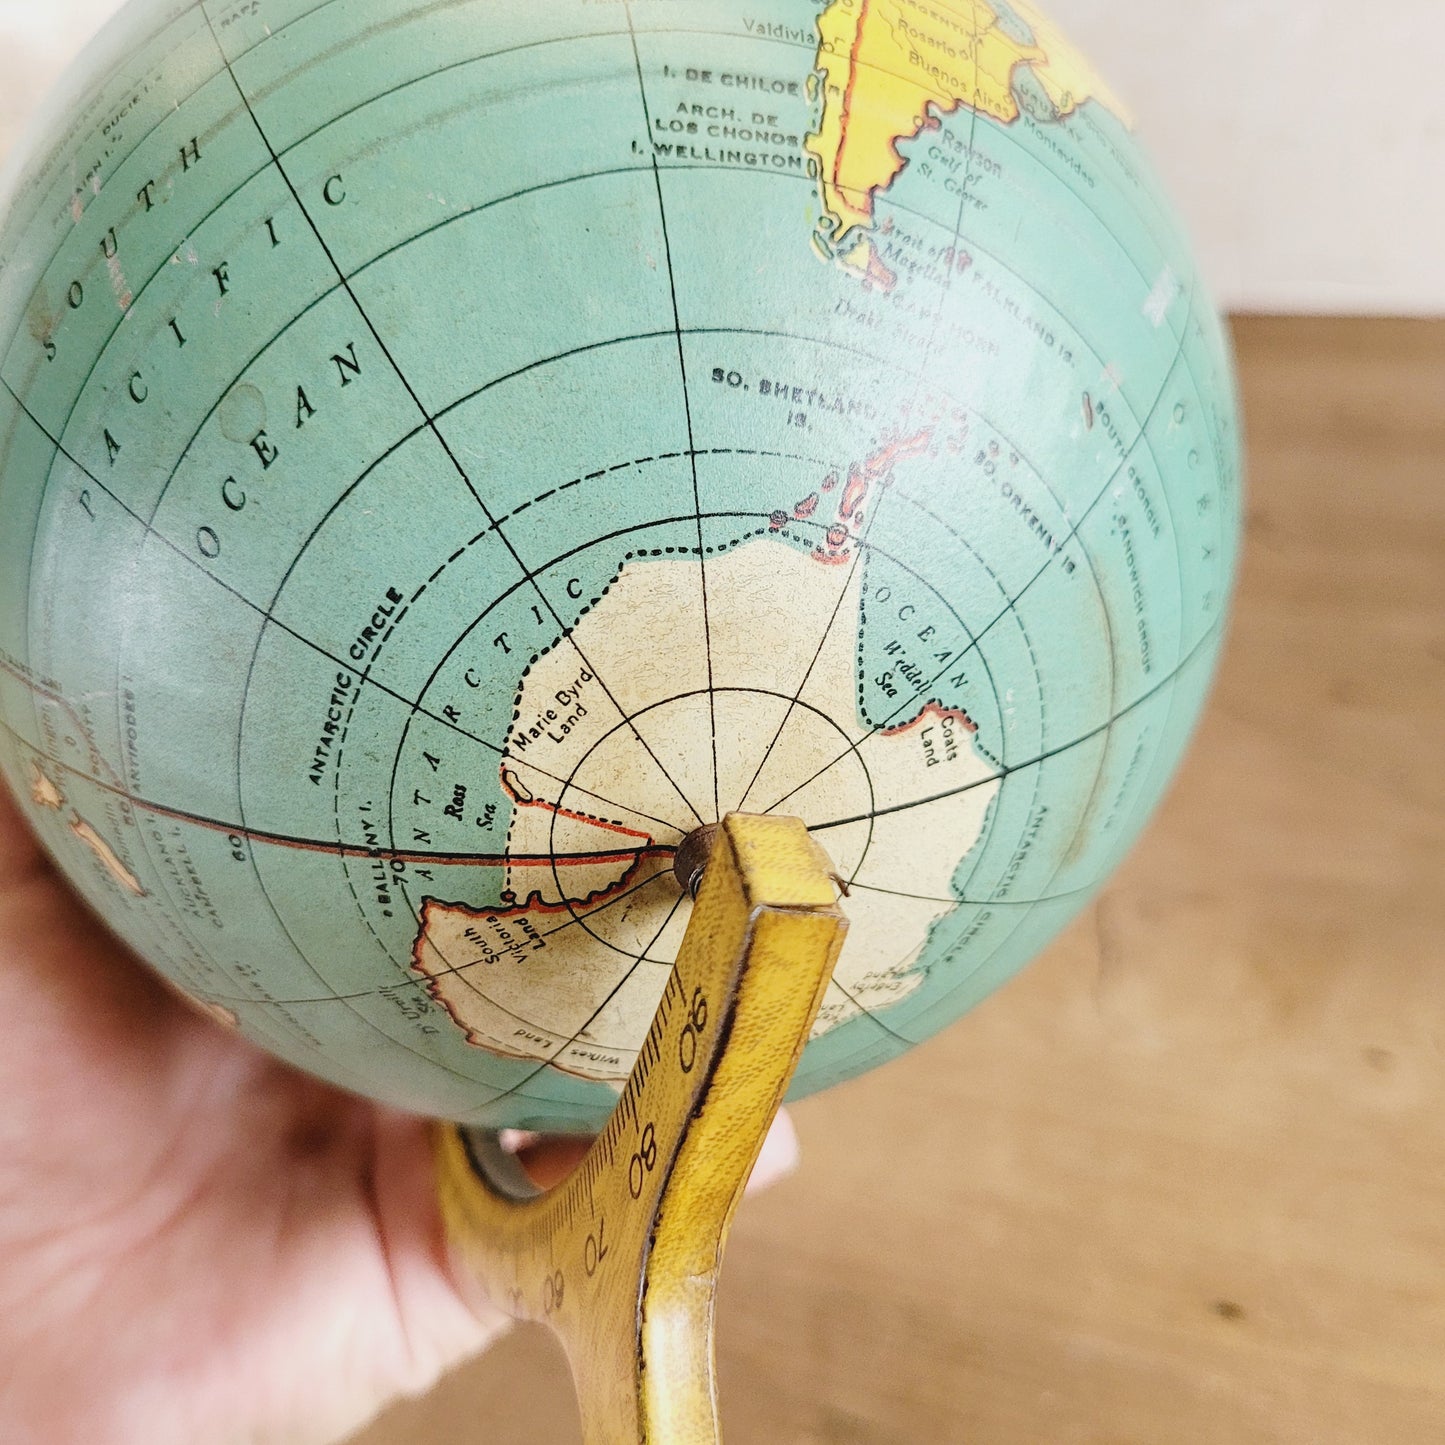 Vintage 1930s J. Chein and Co. World Globe Toy